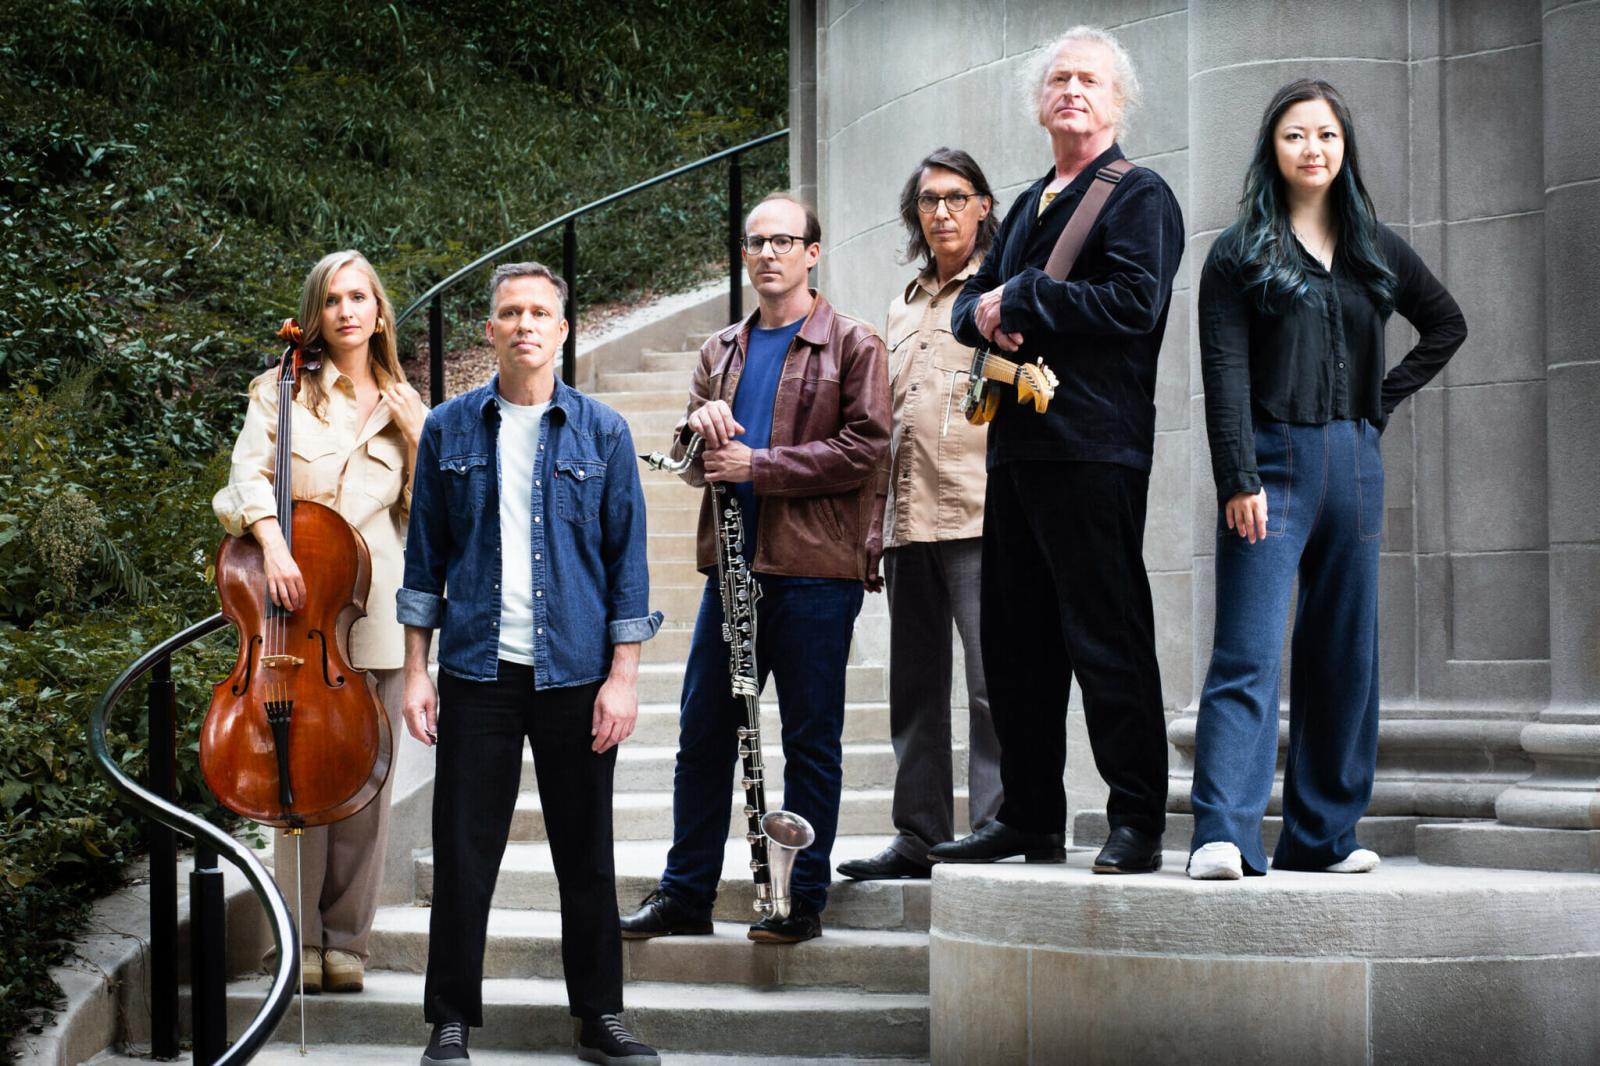 The six performers of Bang on a Can All Stars stand across a set of steps with a railing running down the left side. The Cellist and the Bass Clarinetist have their instruments. 